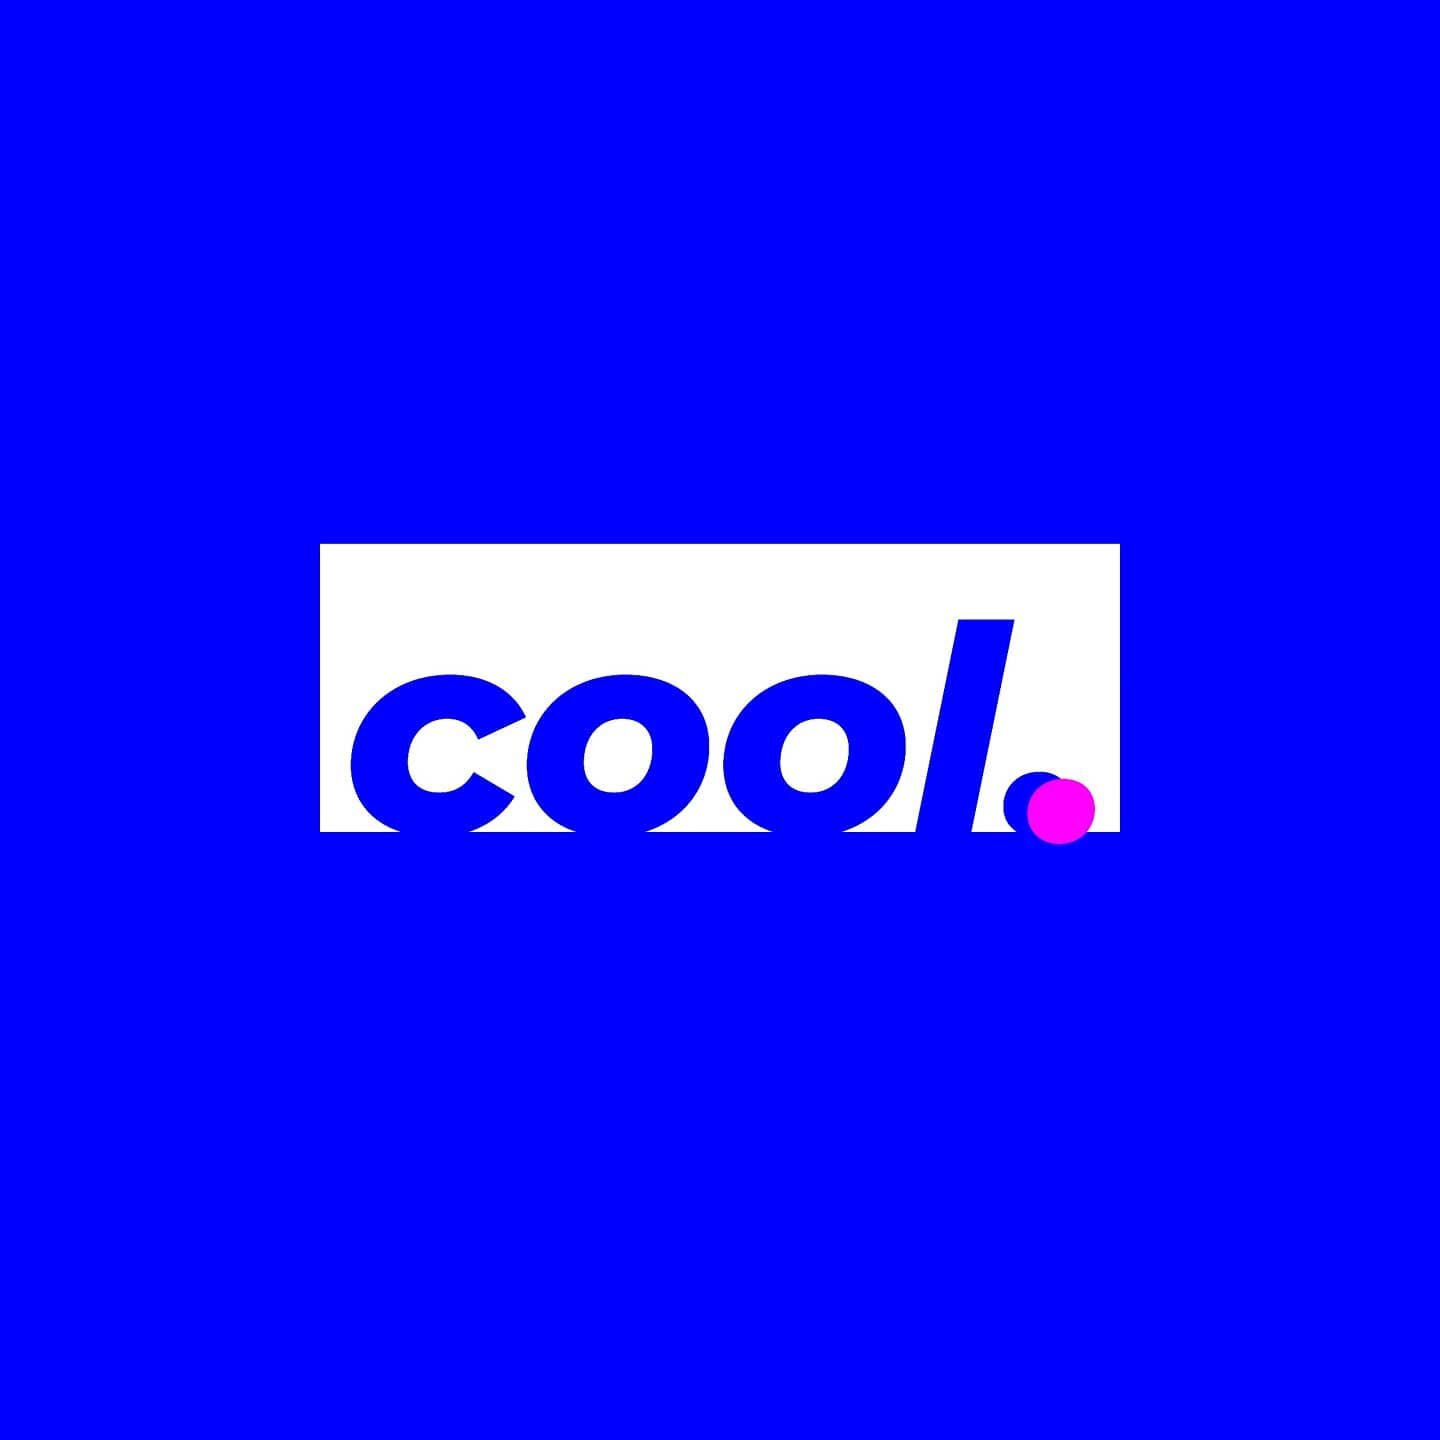 Does 'cool.' look better with the blue or white background?
...
...
#design #logo #logodesigner #graphicdesign #graphicdesigner #logos #designspiration #brands #branding #branddesign #logodesign